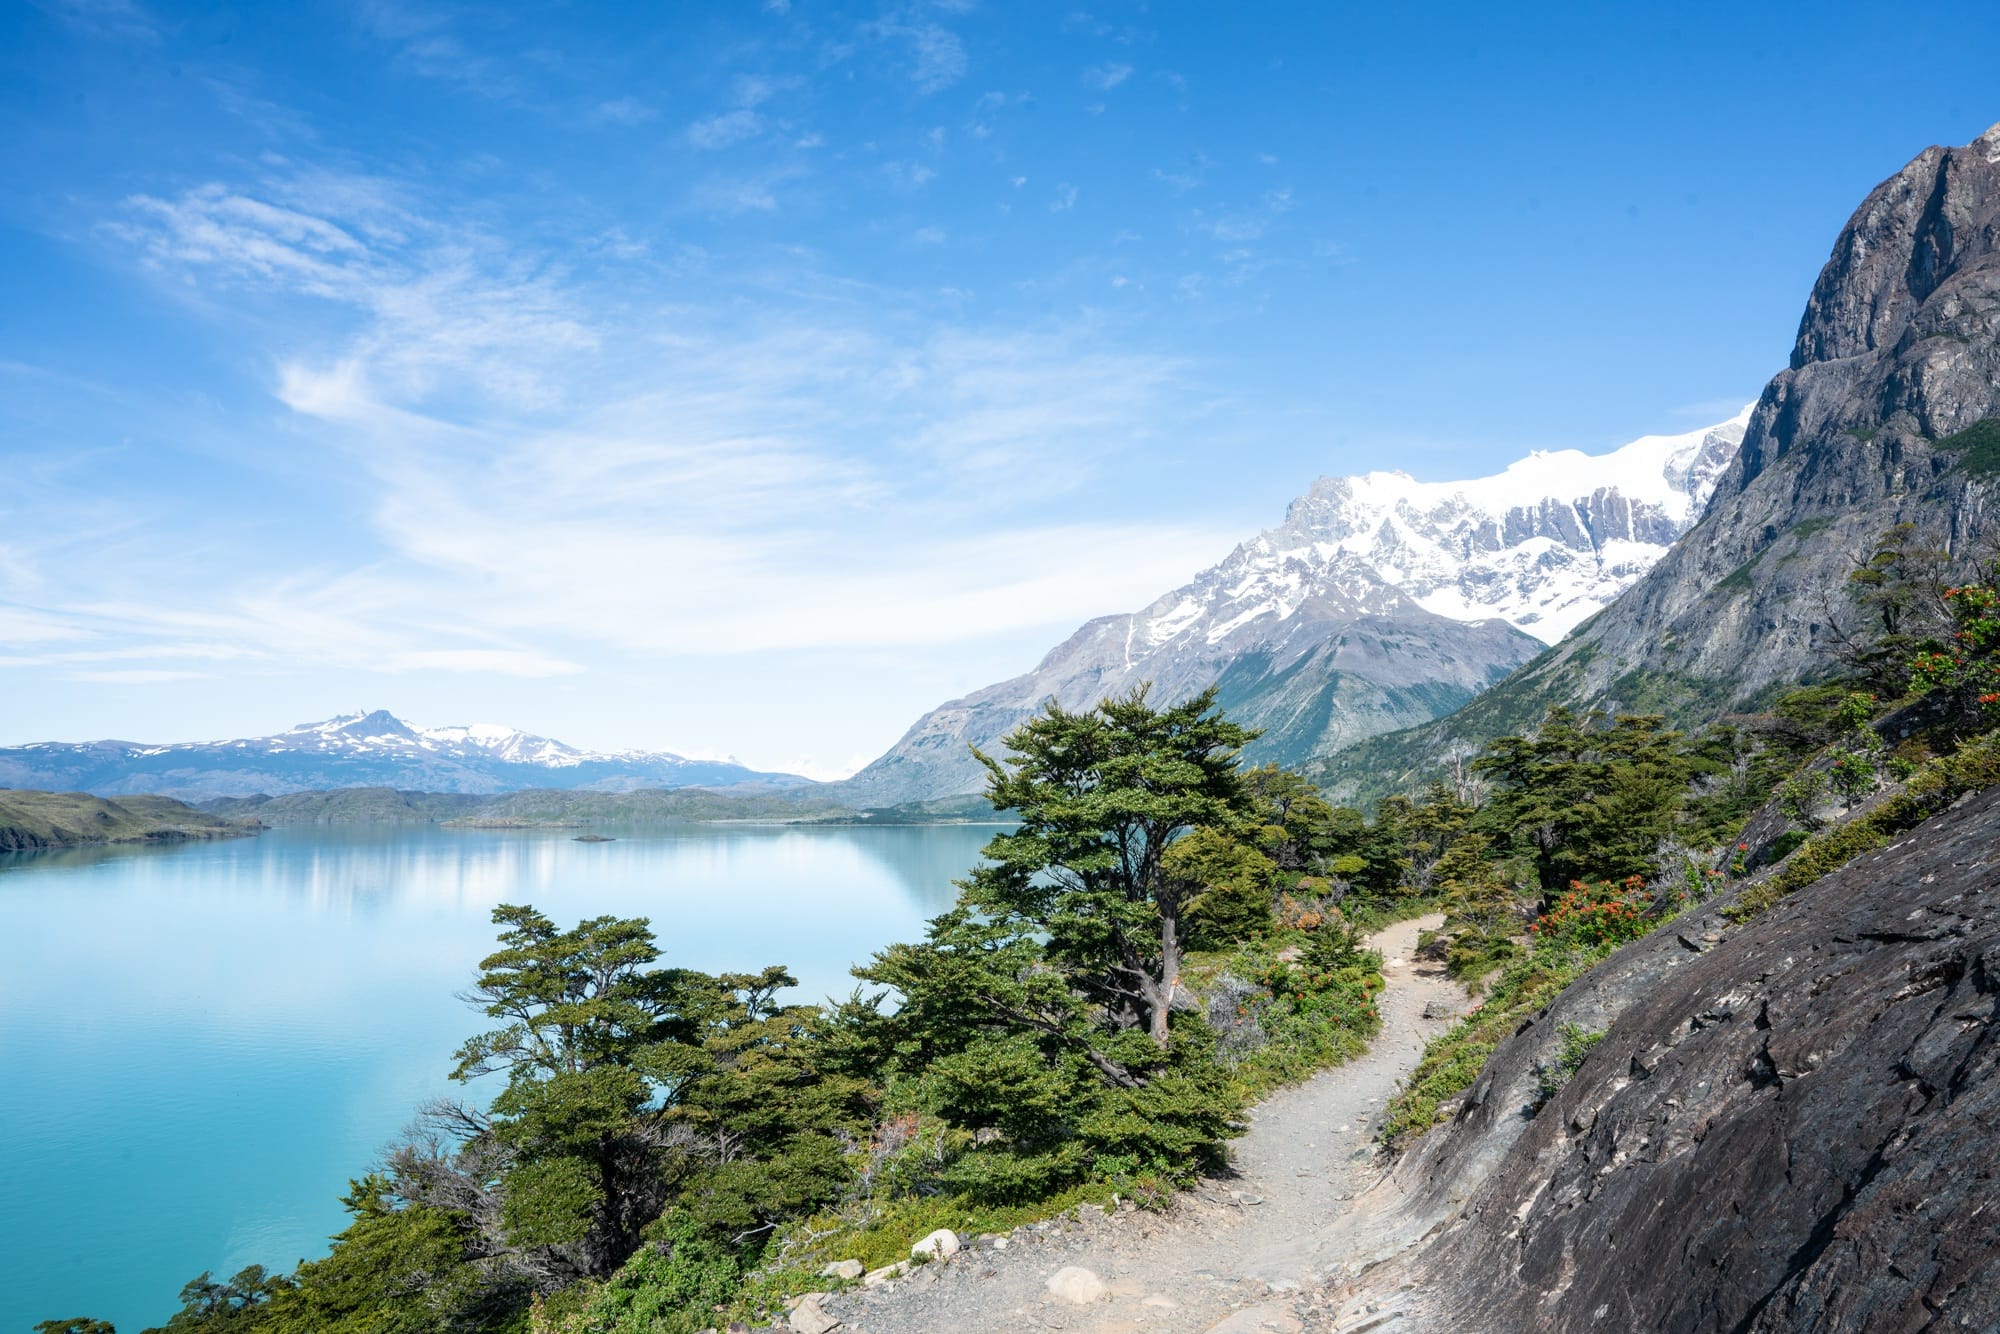 Want to hike the W Trek in Torres Del Paine? Use our guide to plan this bucket-list trail in Patagonia complete with itinerary, gear, and campsite tips.